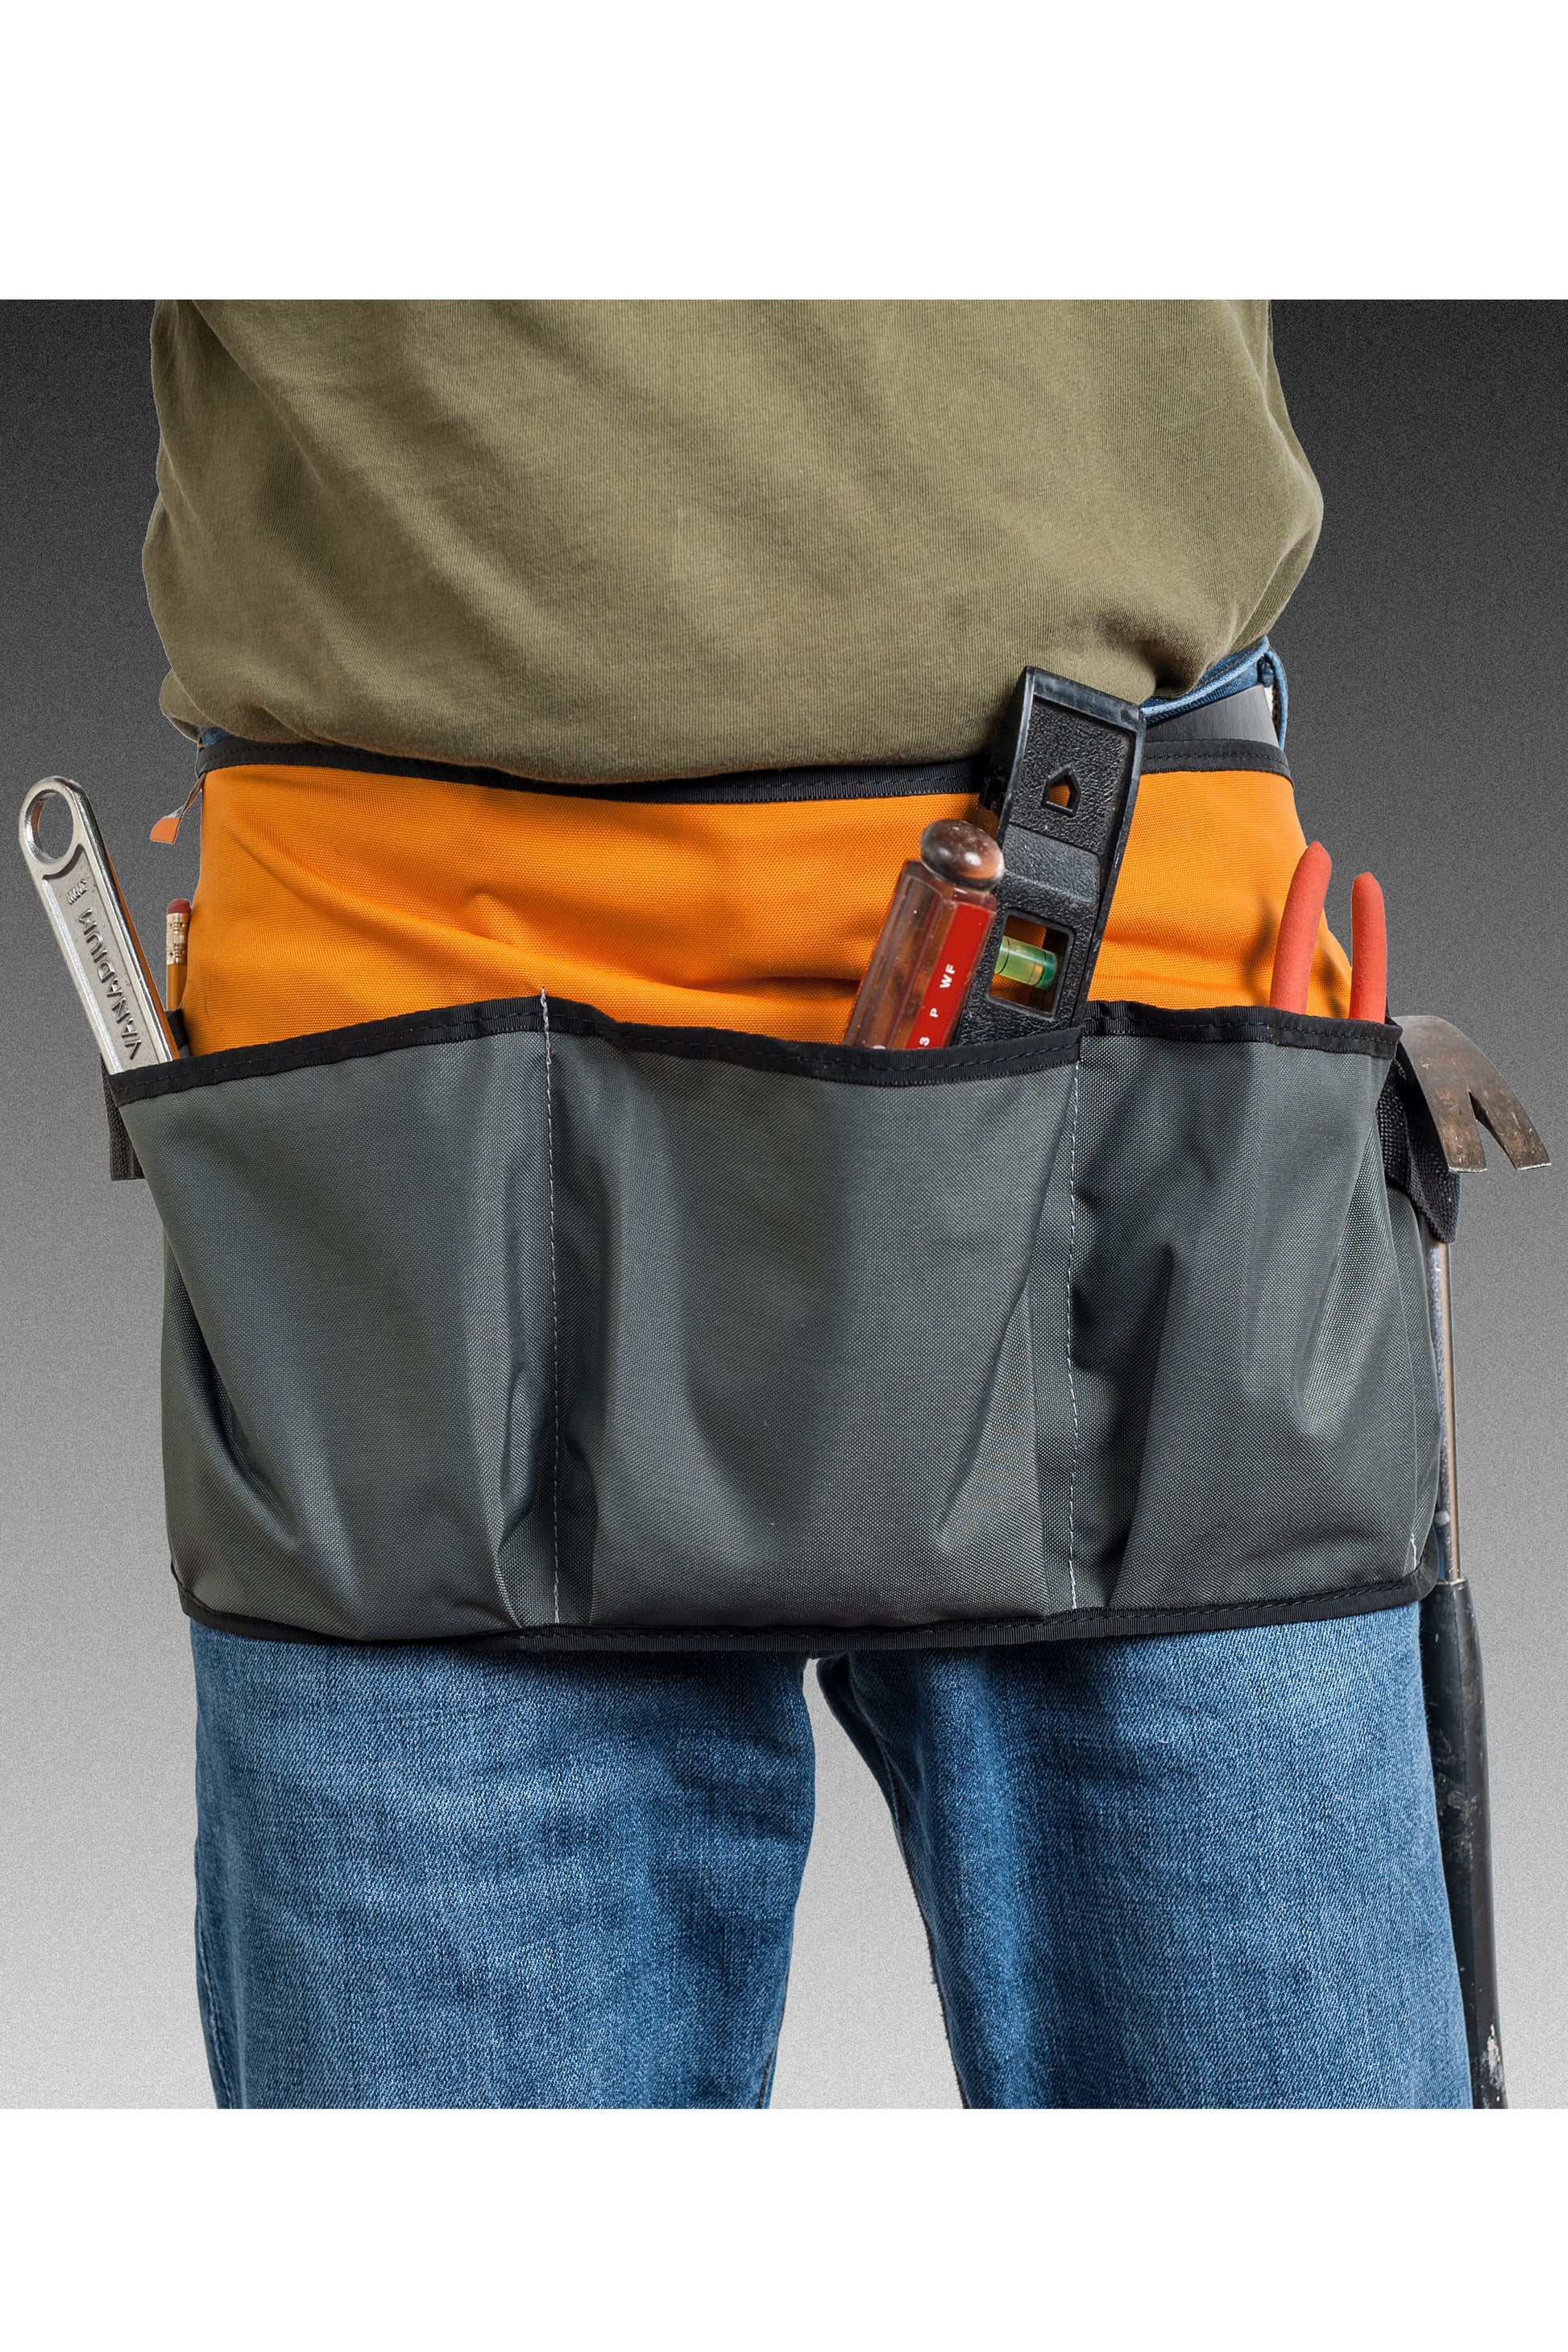 AltaGEAR Gadget Pouch with Belt Loops